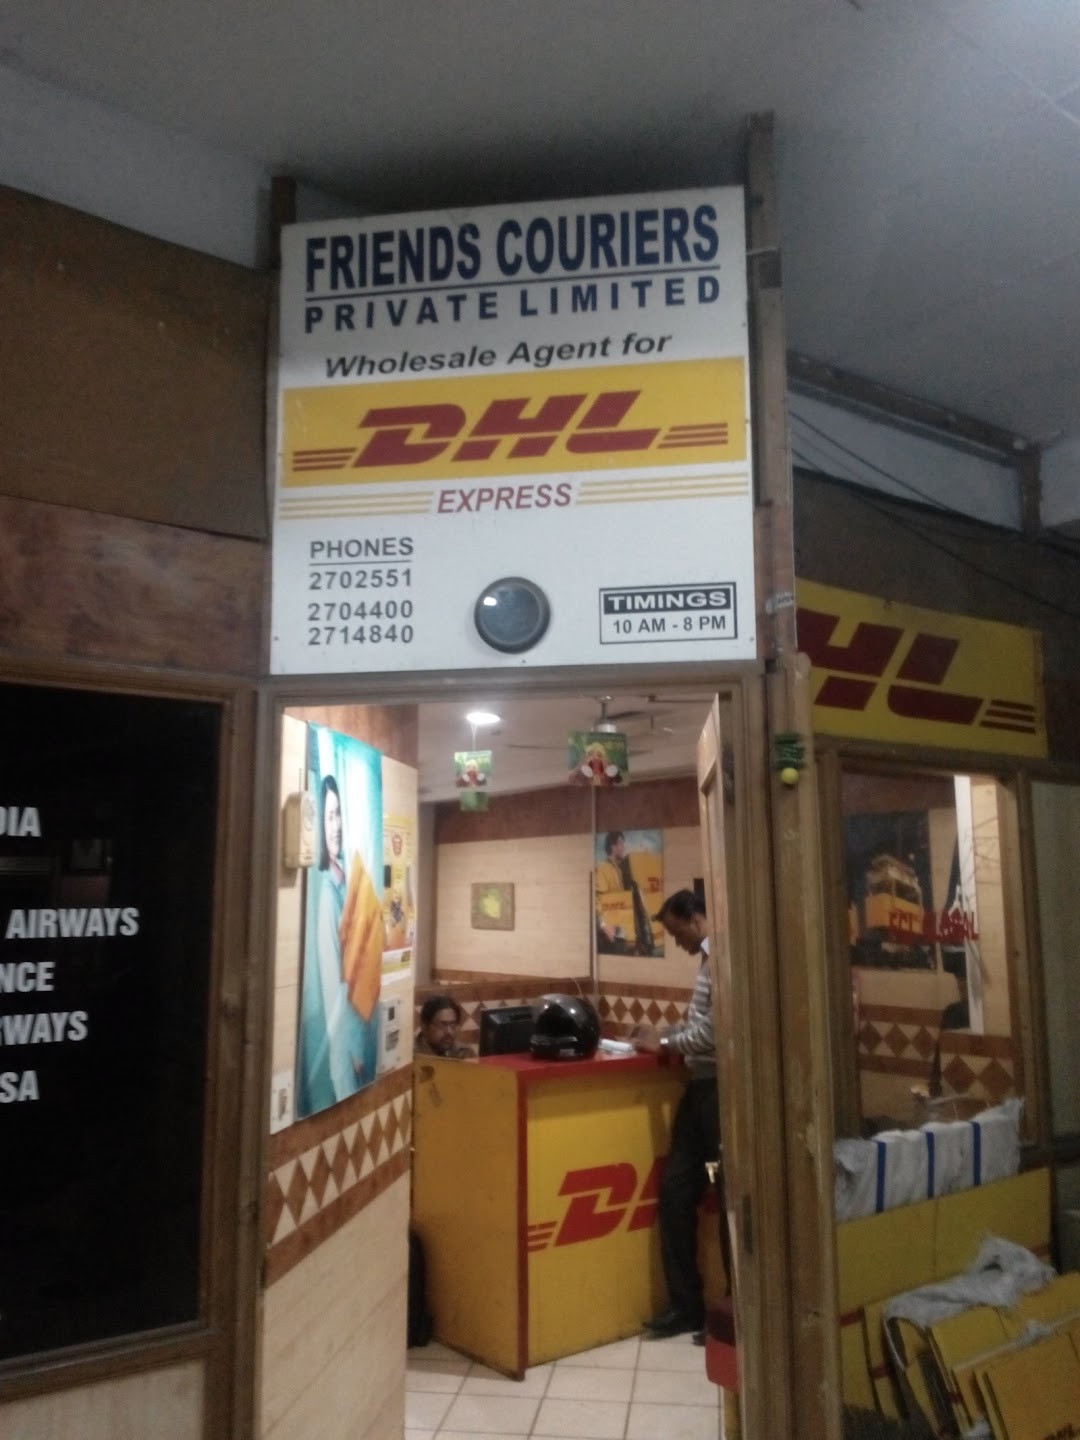 Friends Couriers Private Limited